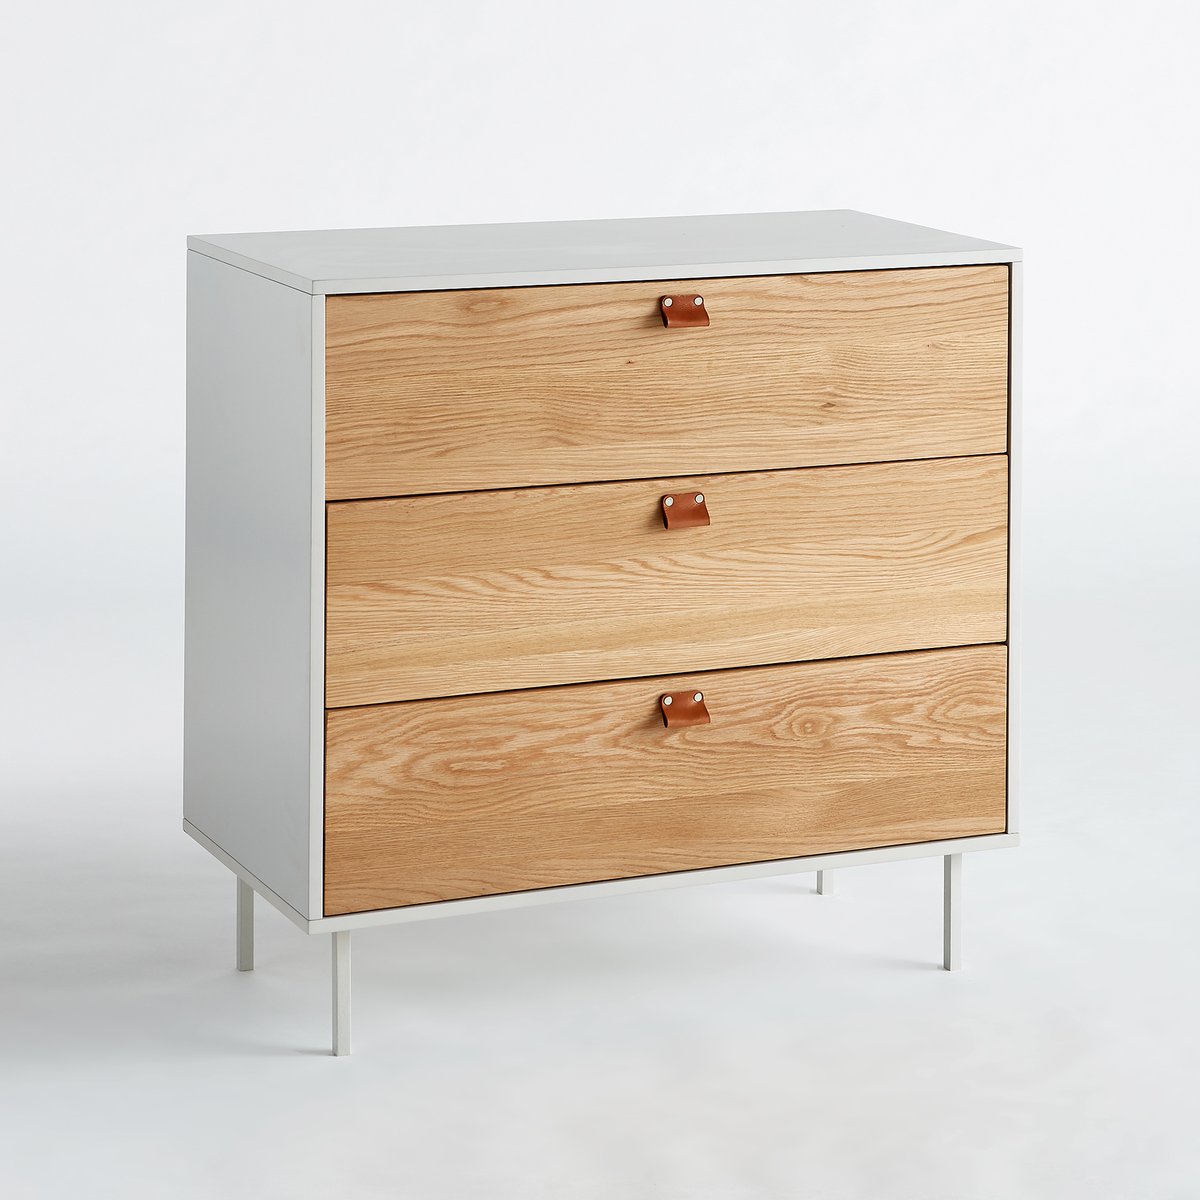 Image of Carabala Chest of Drawers